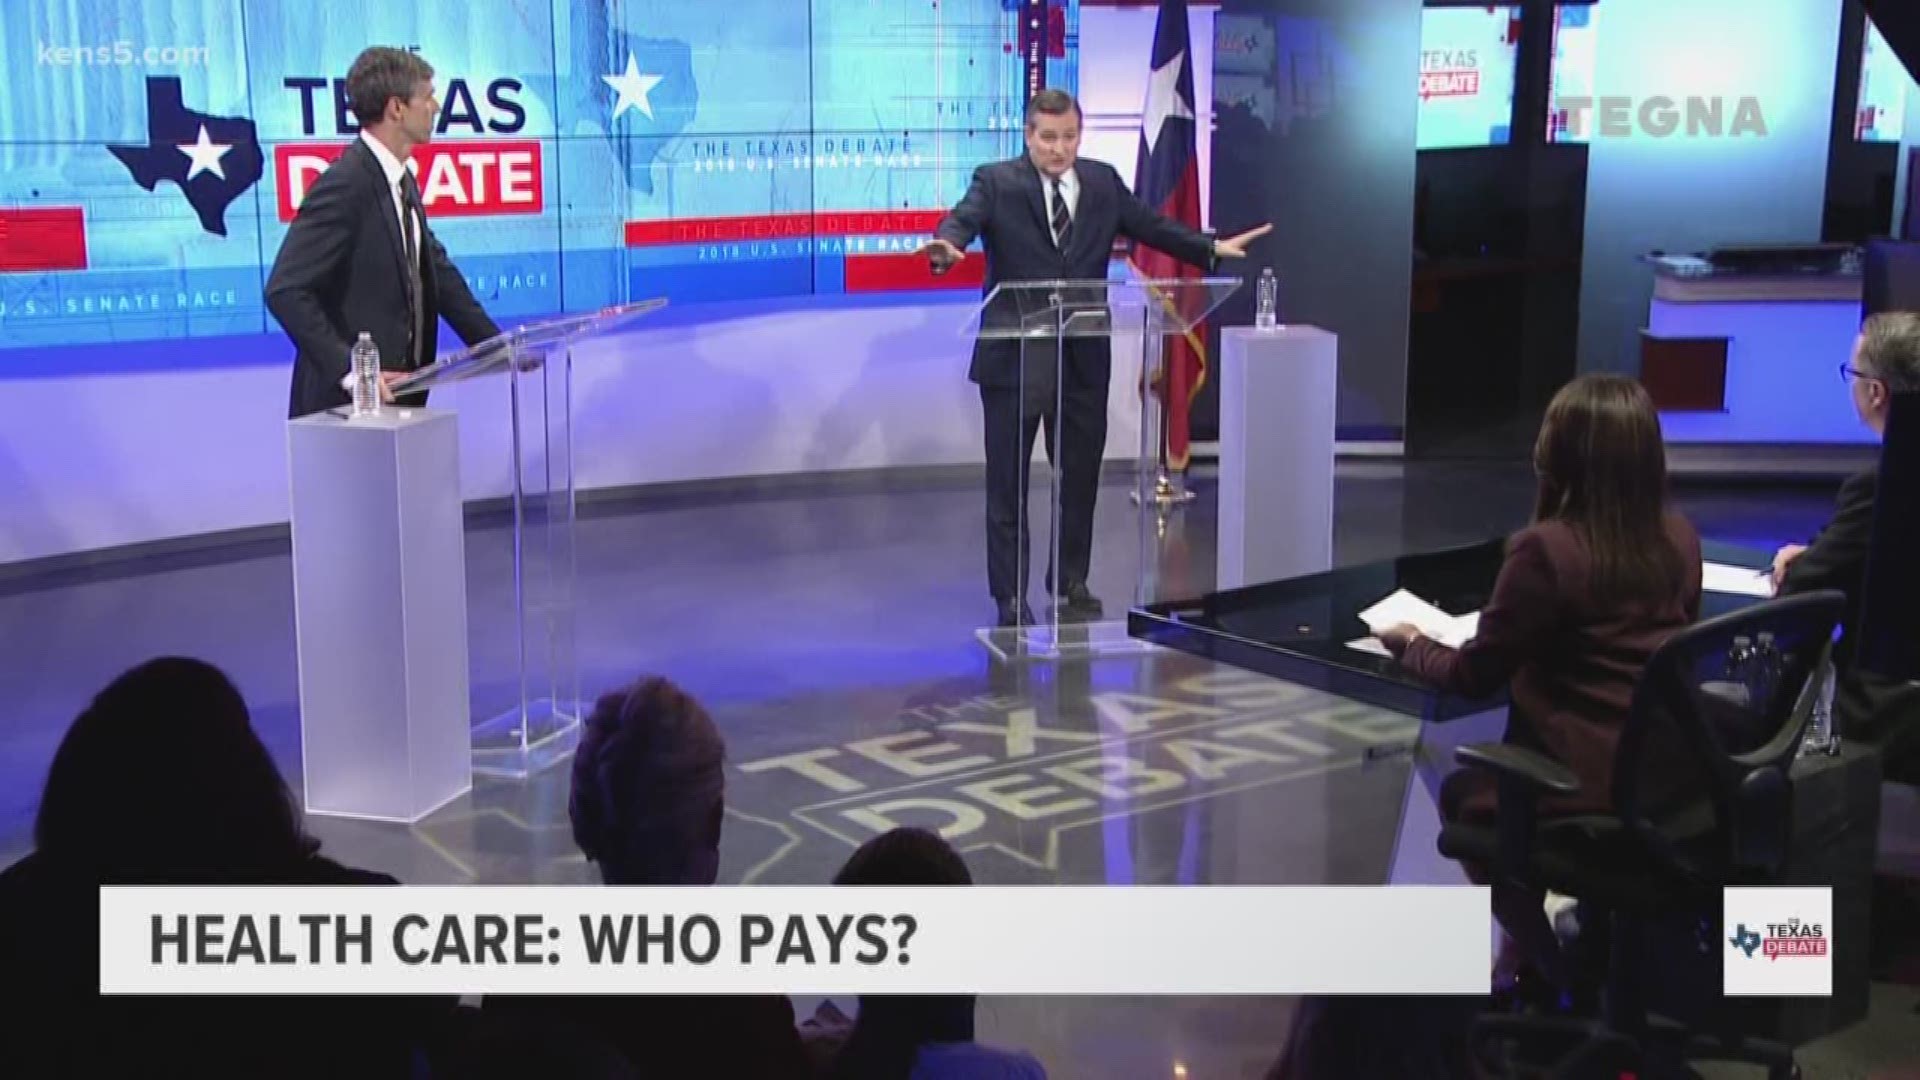 O'Rourke described what a universal health care system would entail, while Cruz argued that it's financially unimaginable.